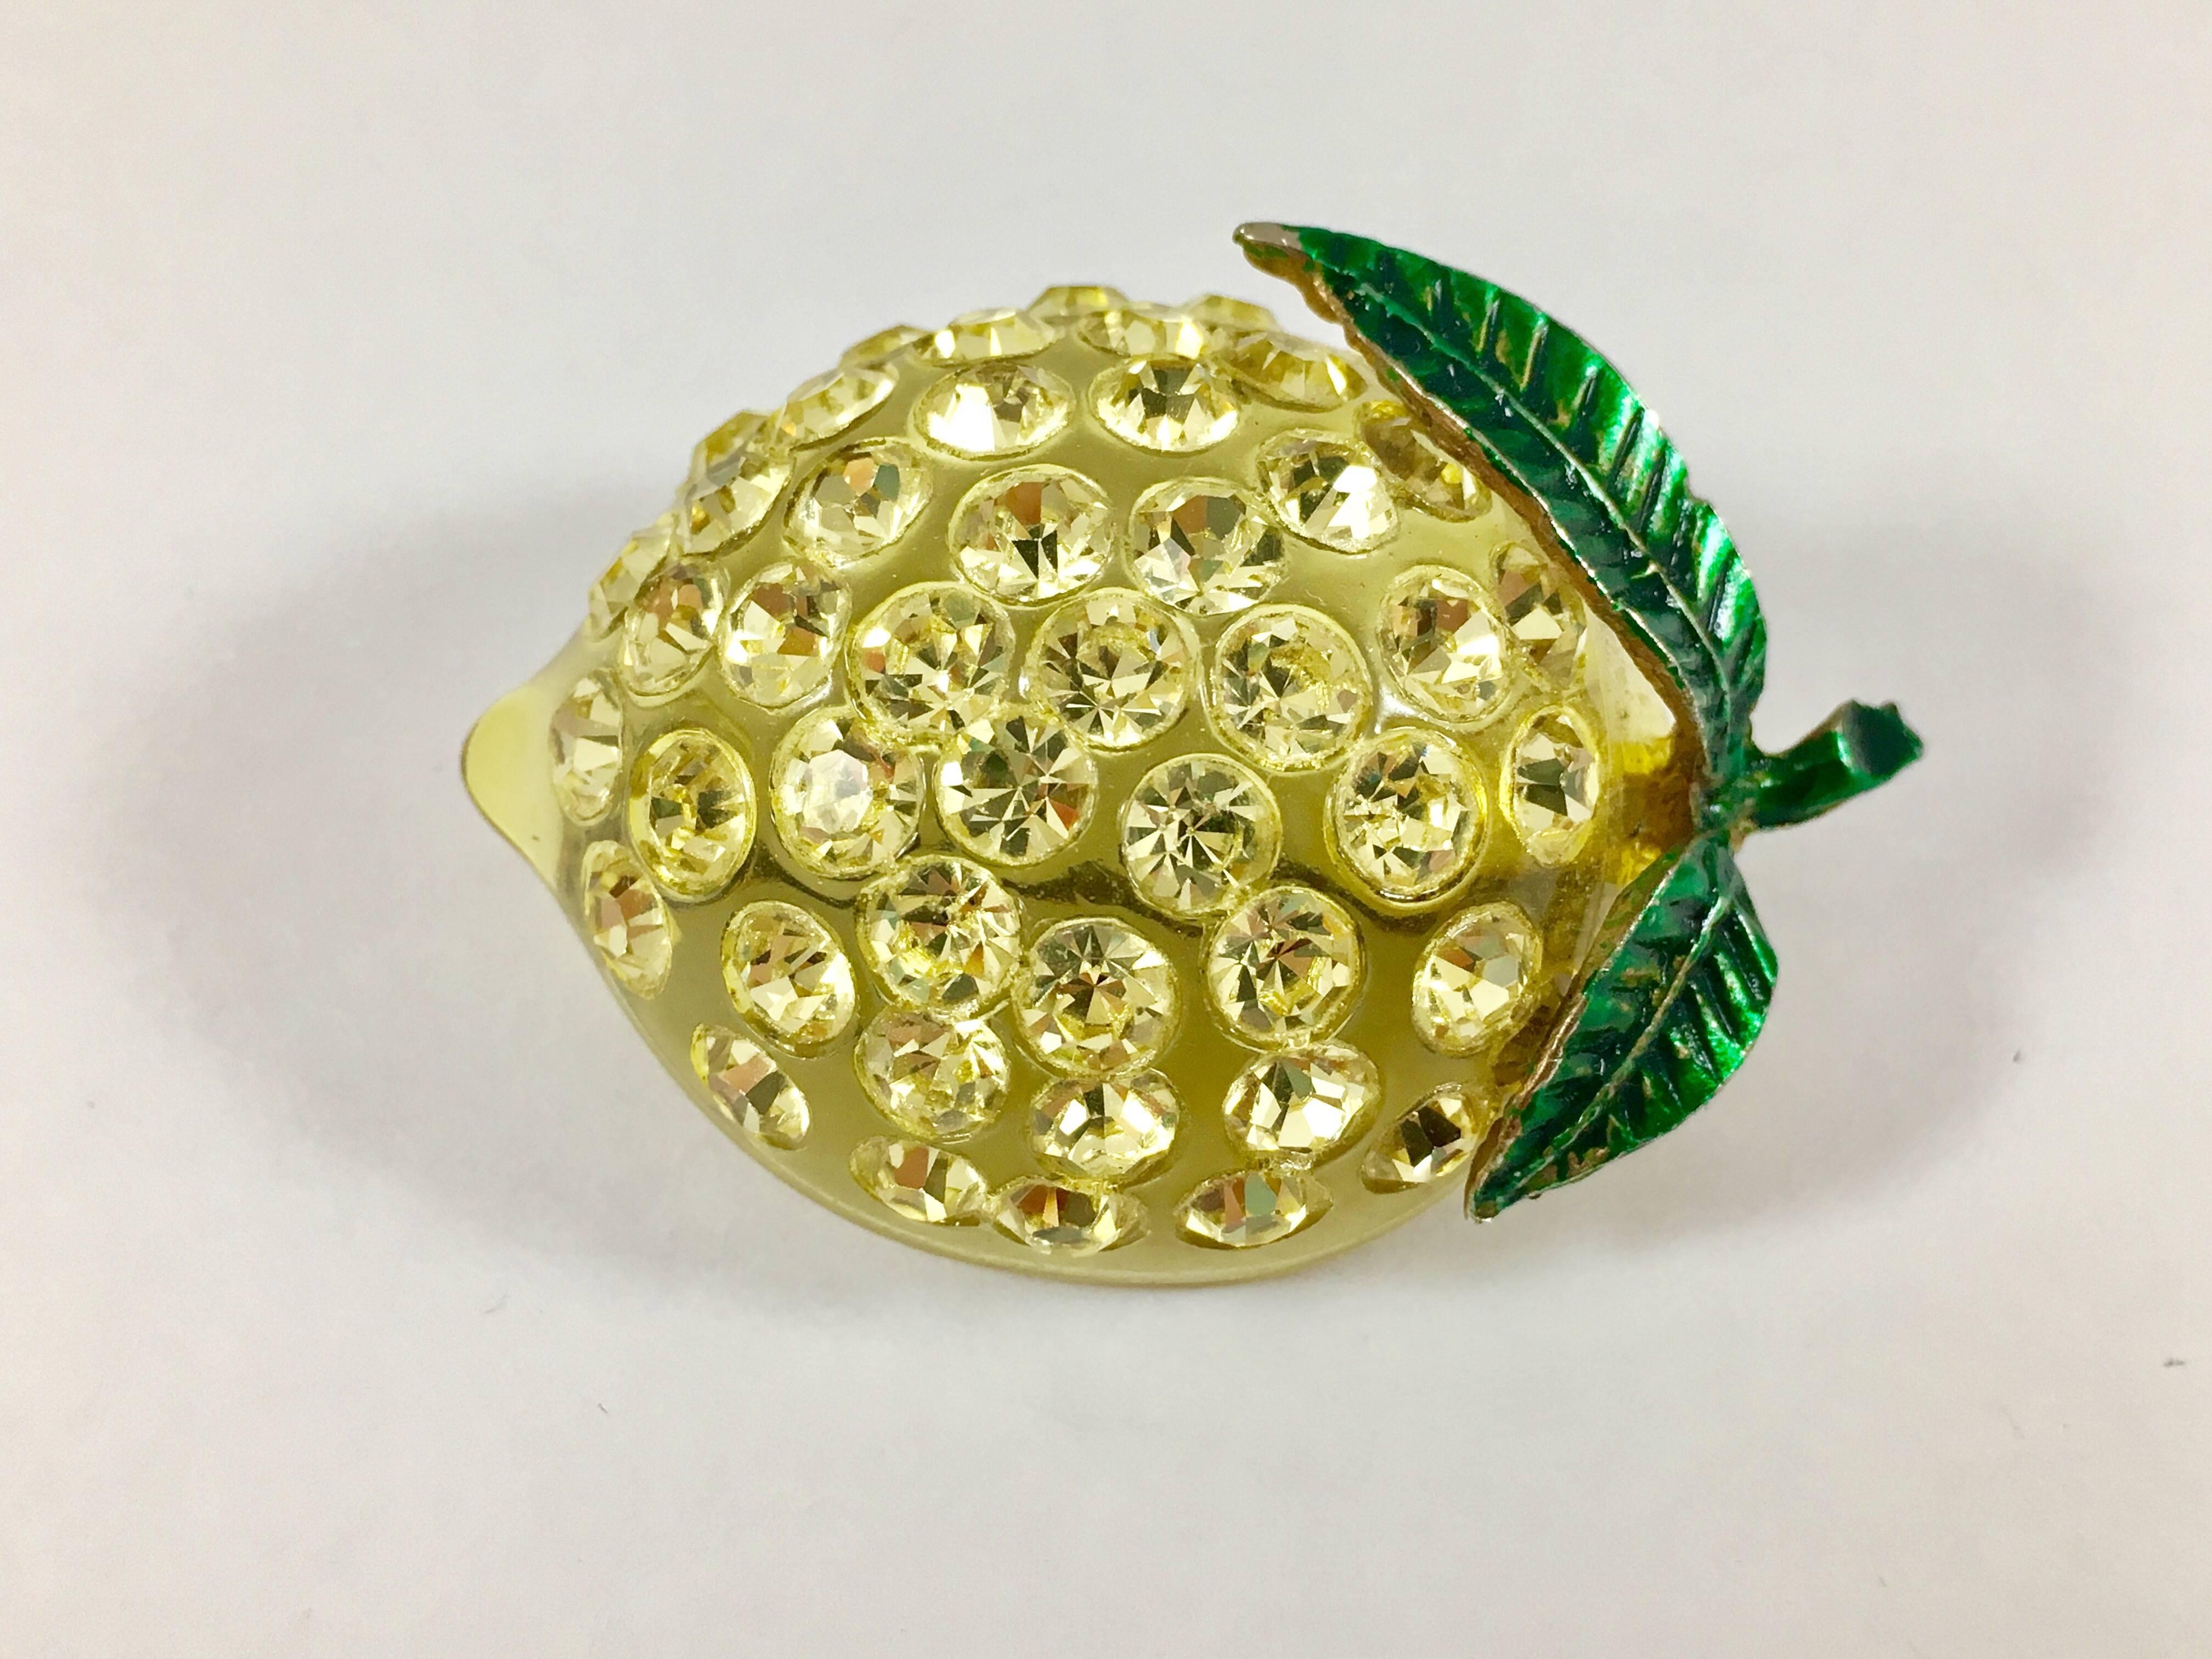 This is a yellow lucite and rhinestone lemon brooch from the 1940s. It has a metal green enameled stem and leaves and measures 2 inches wide x 1 inch tall. It is in excellent condition and so fun for Summer. These pieces were made in Austria in the